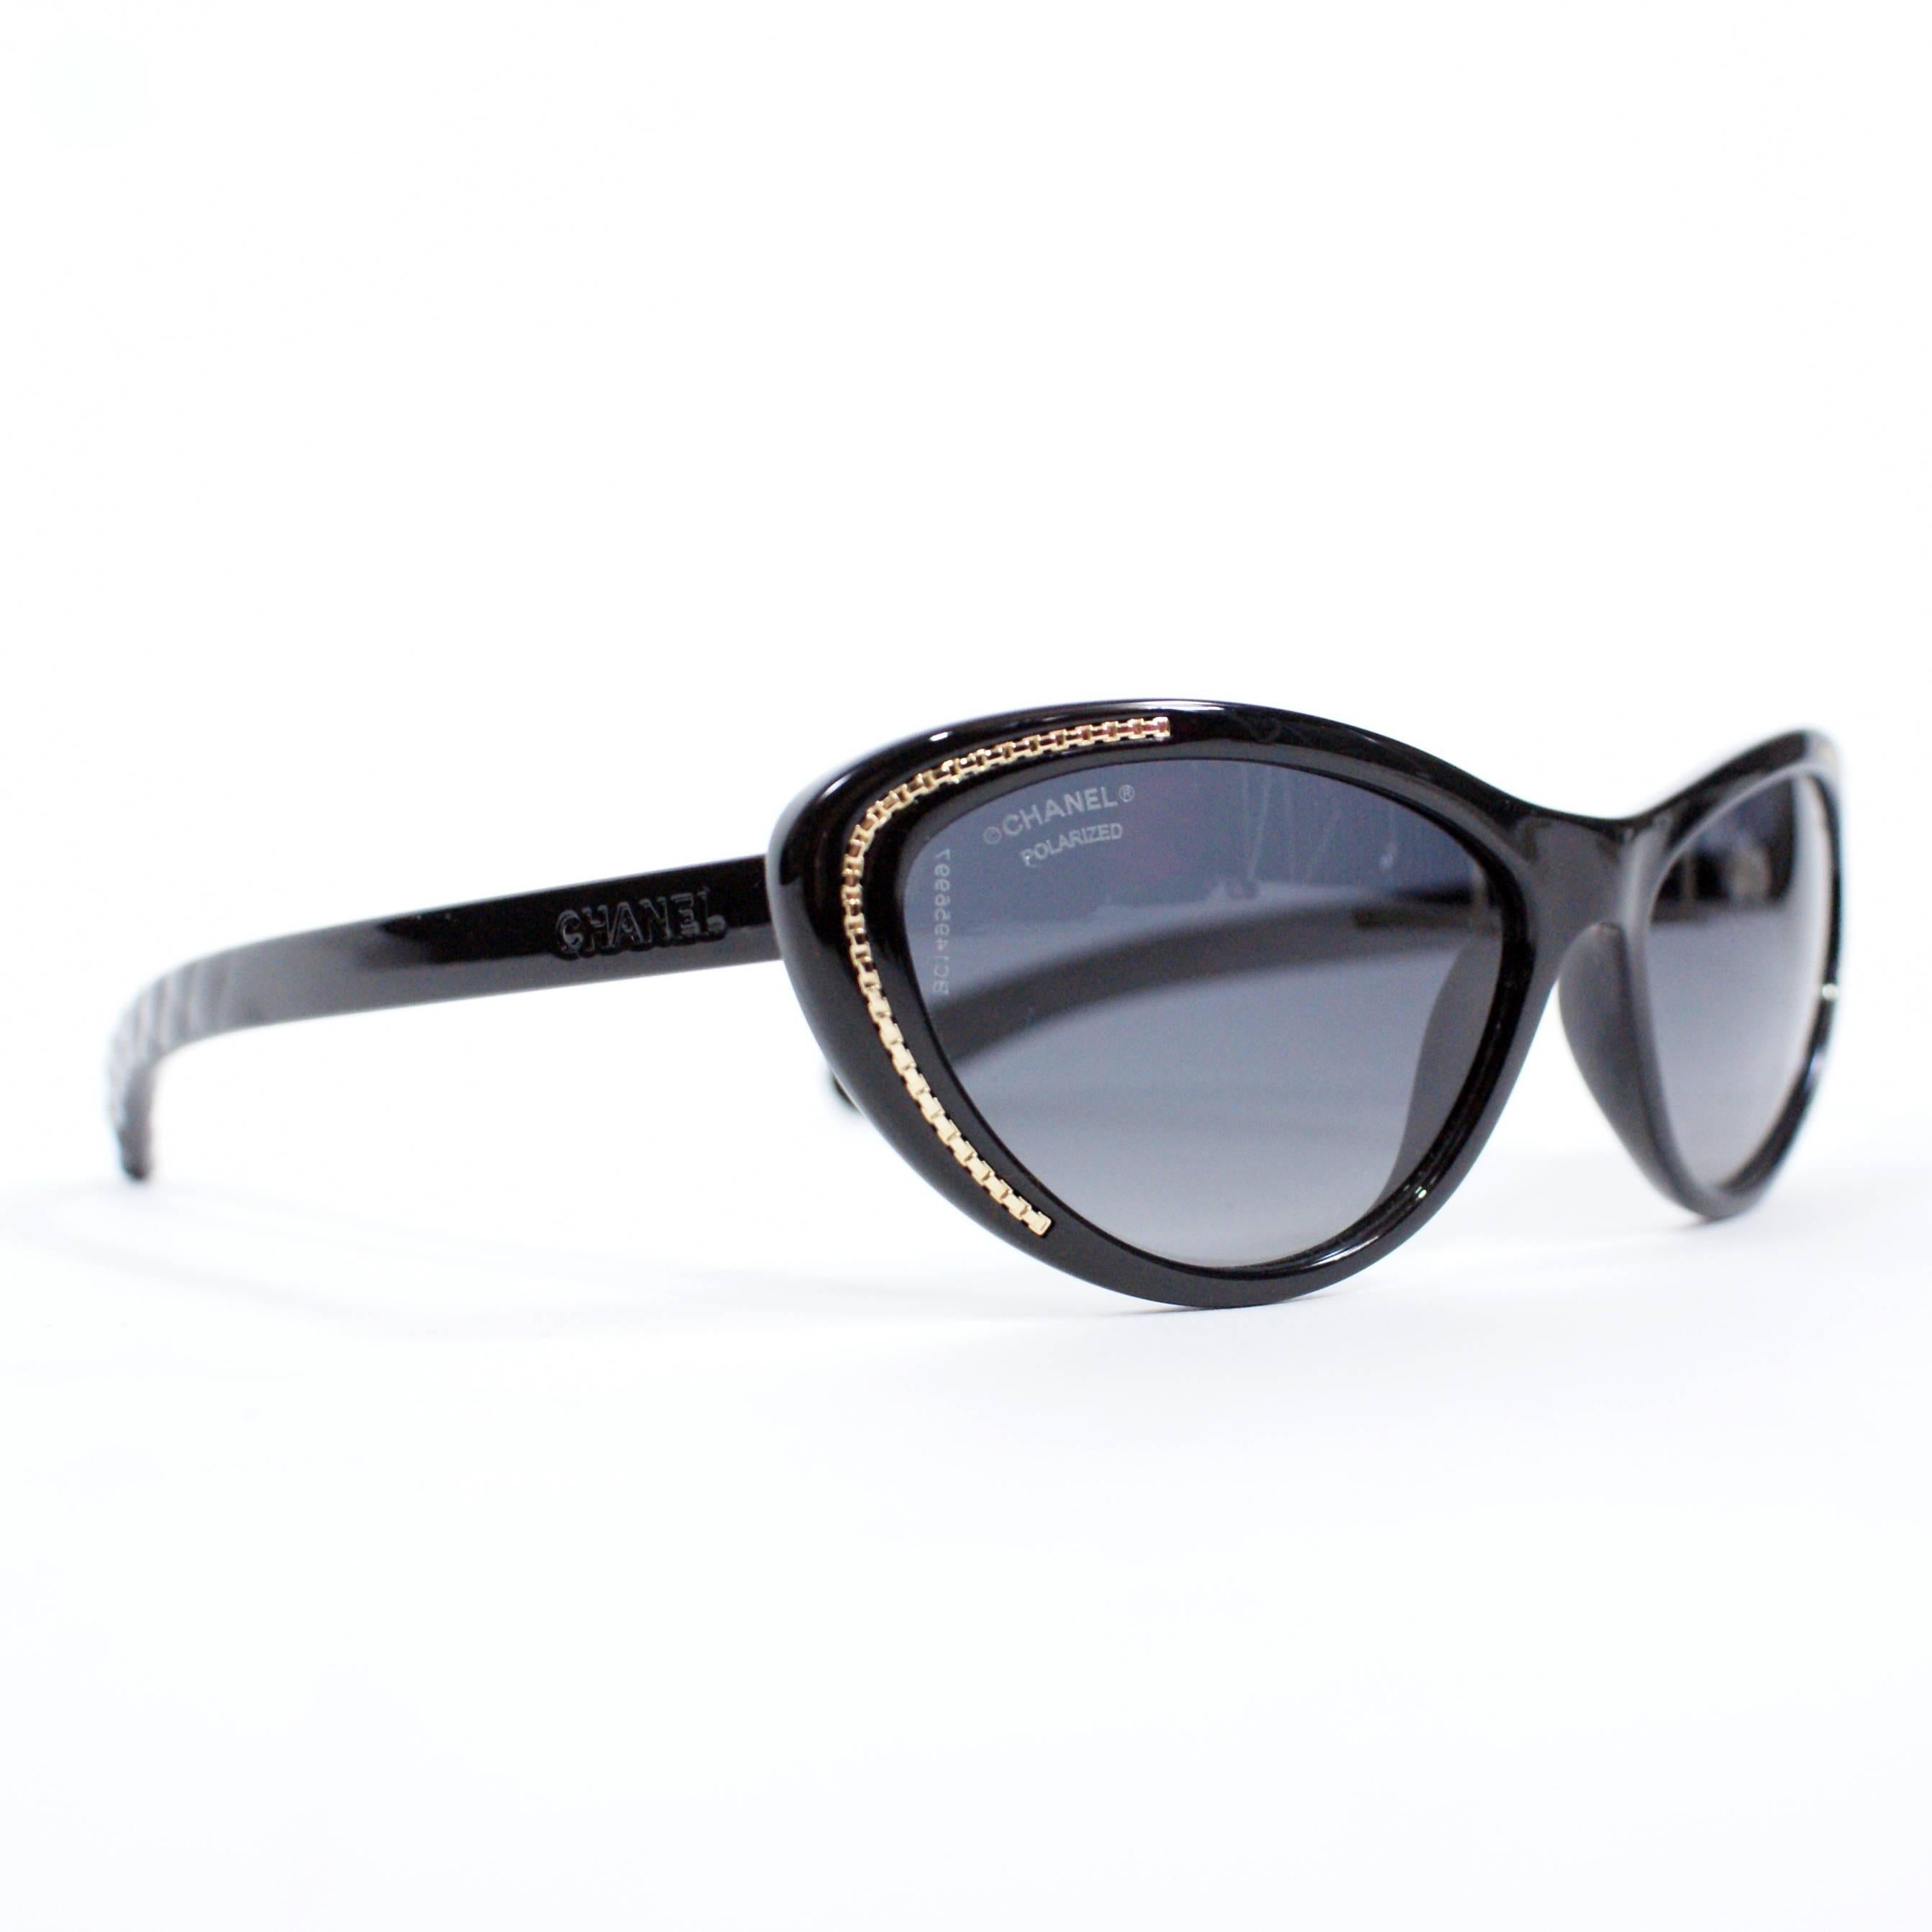 Chanel Cat-Eye Black sunglasses new with case.